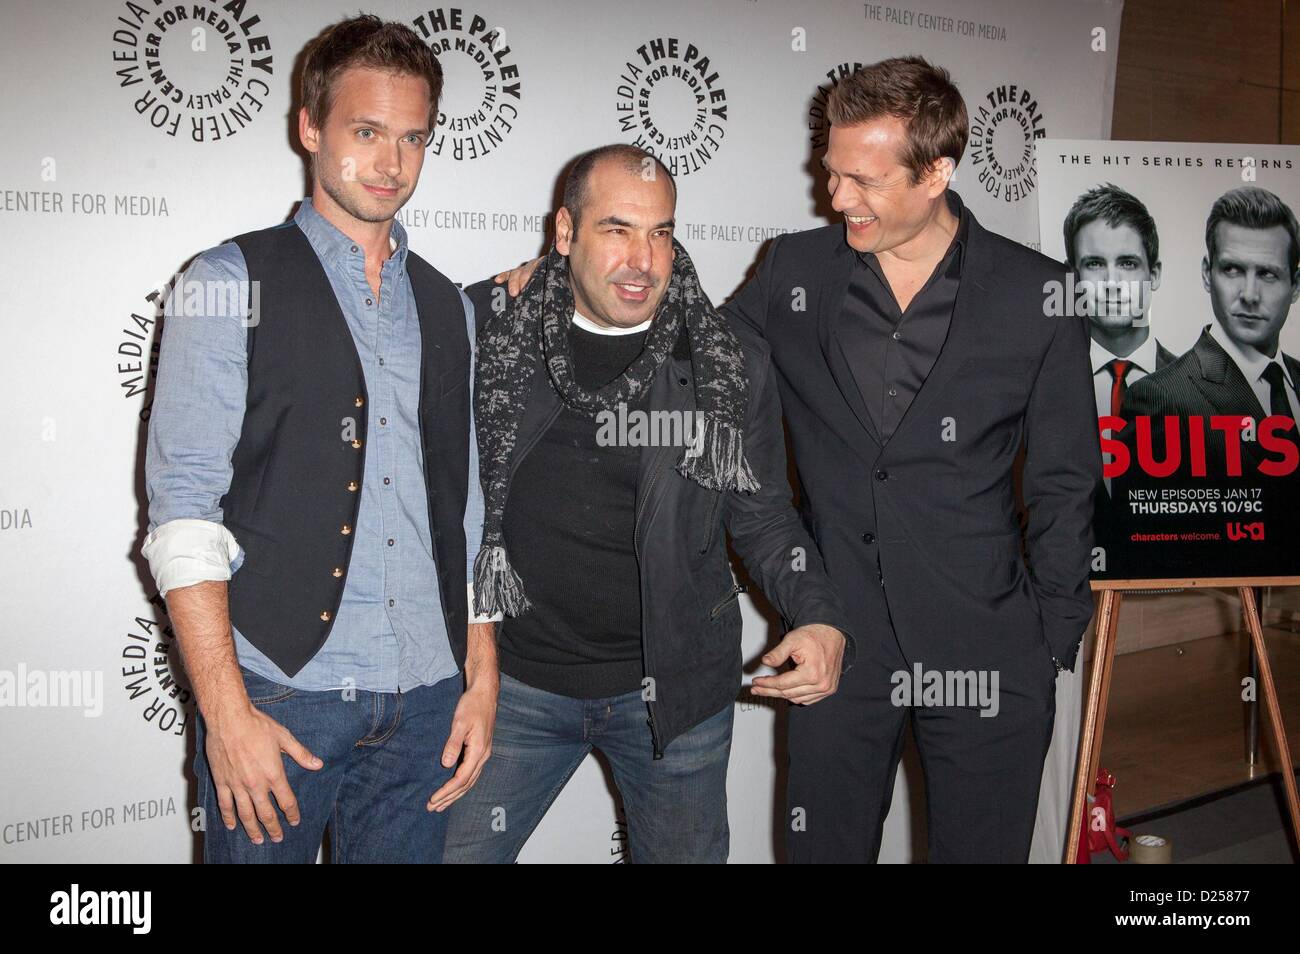 Beverly Hills, California, USA. 14th January 2013. Patrick J. Adams, Rick  Hoffman, Gabriel Macht in attendance for The Paley Center for Media  Presents An Evening with SUITS, Paley Center for Media, Beverly